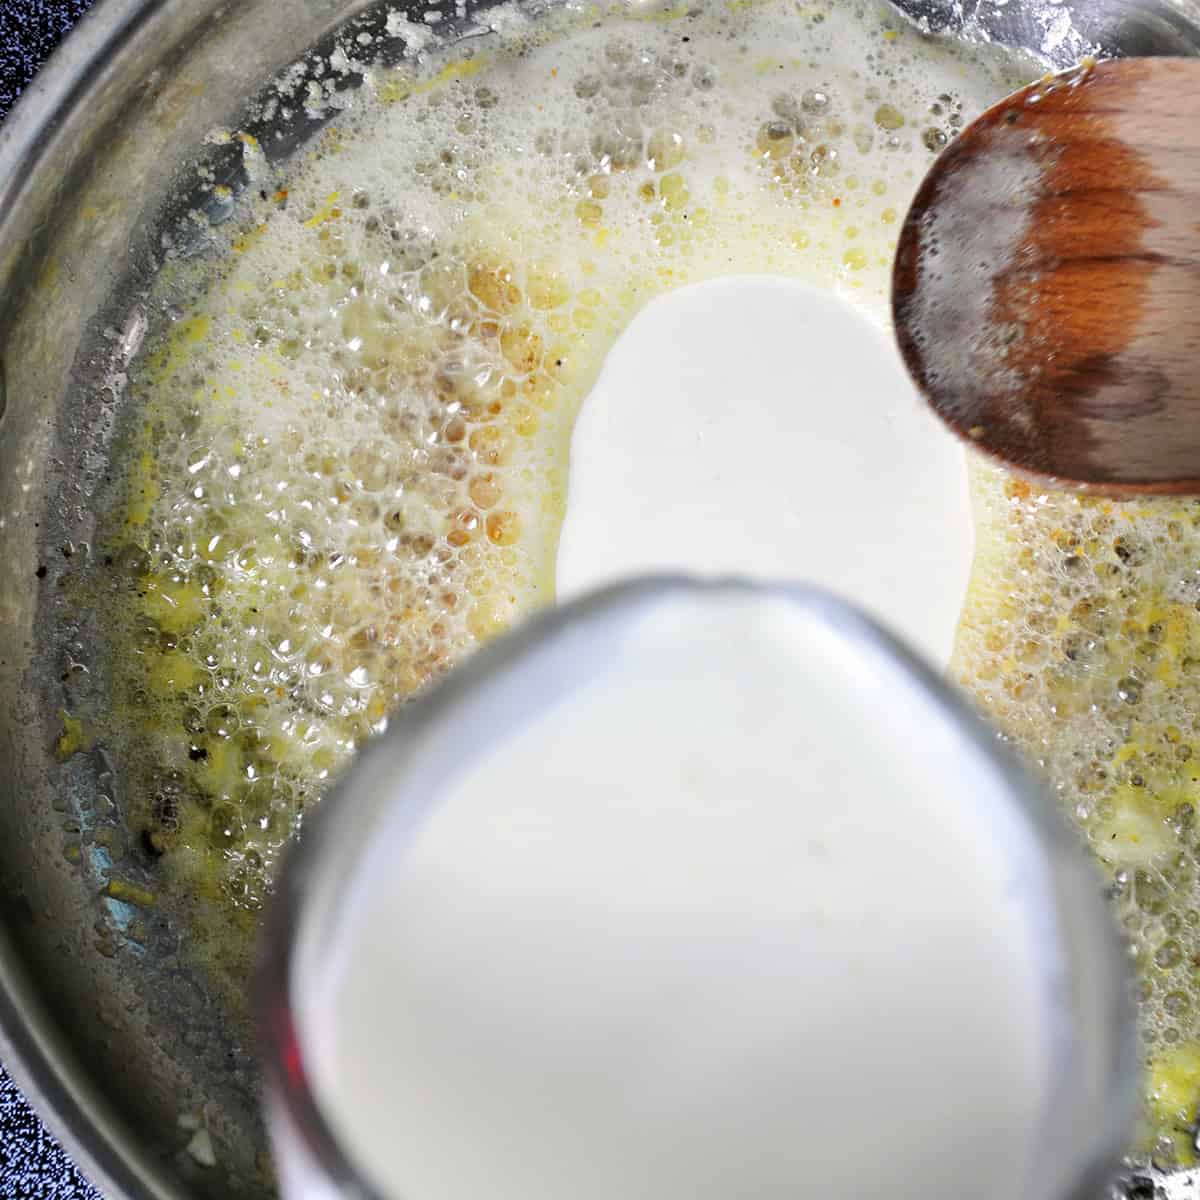 Cream being added to lemon butter sauce.